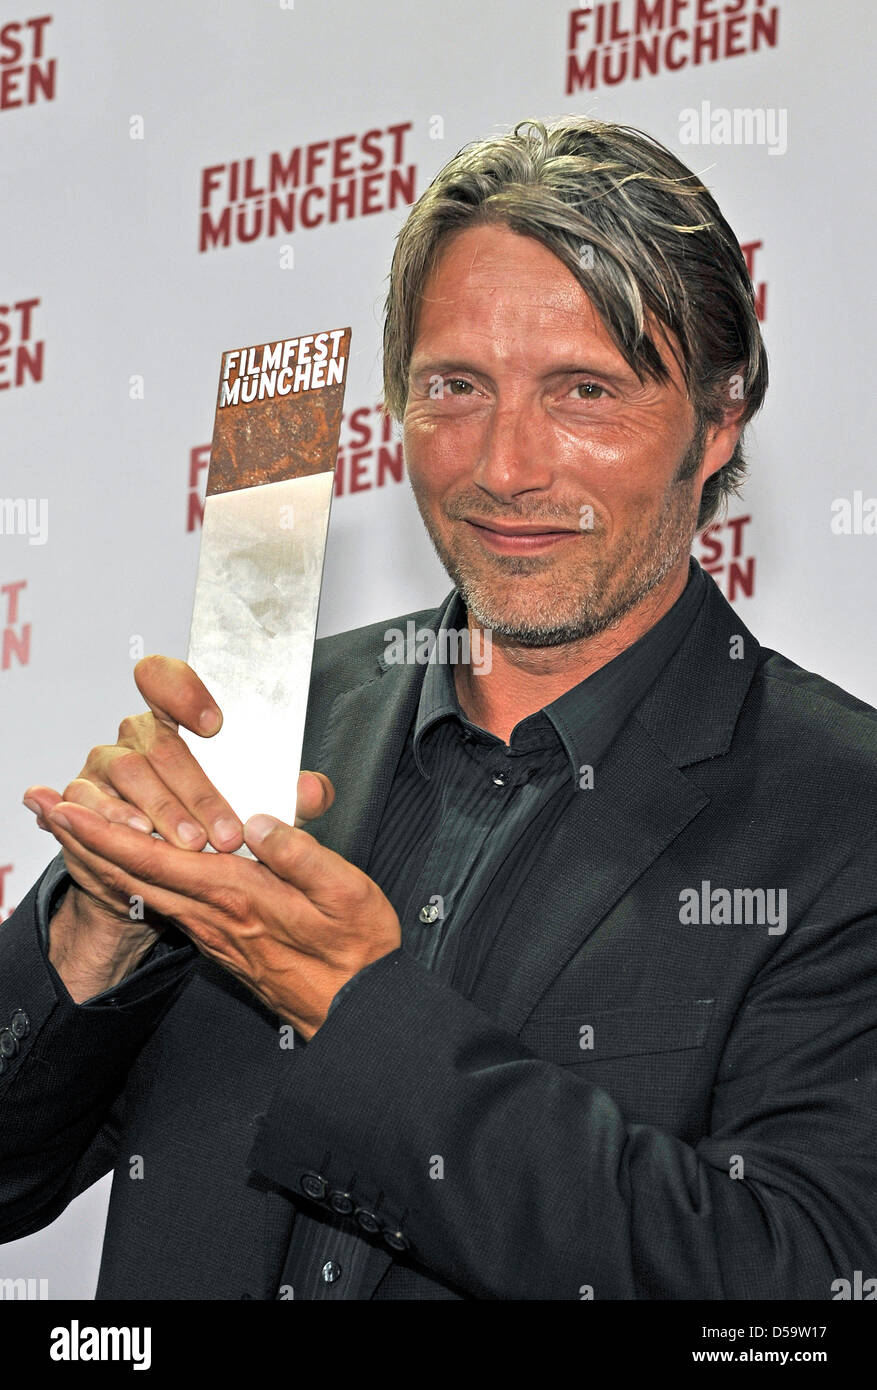 Danish actor Mads Mikkelsen shows off his CineMerit Award during the Munich Film Festival in Munich, Germany, 02 July 2010. This is the 14th time the Munich Film Festival honours extraordinary personalities of the international film business with the award. Photo: Ursula Dueren Stock Photo